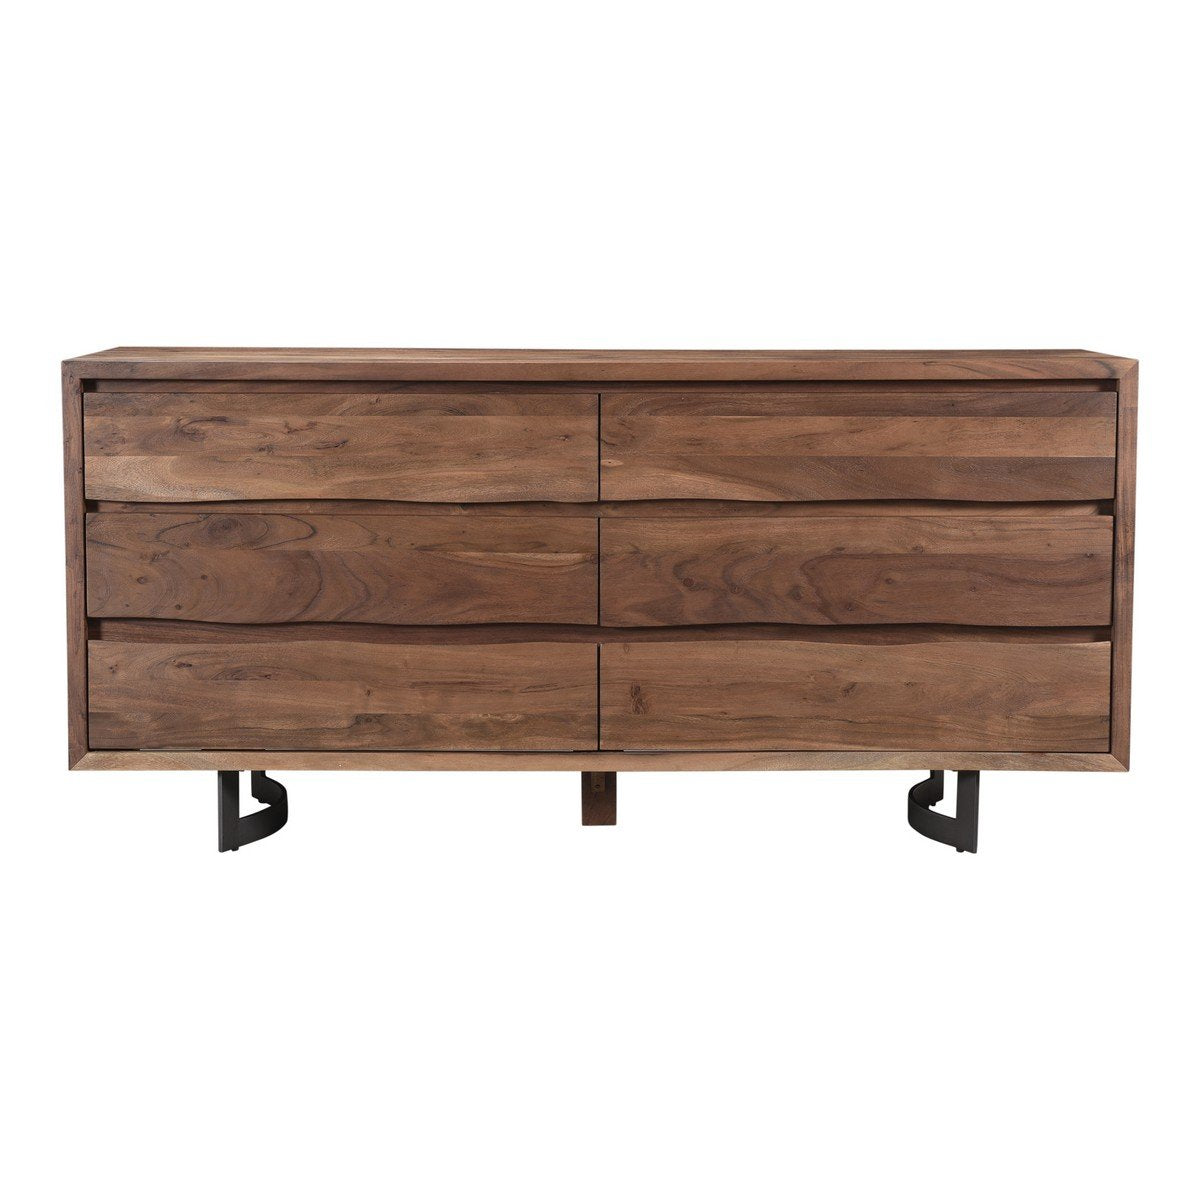 Moe's Home Collection Bent Dresser Smoked - VE-1097-03 - Moe's Home Collection - Dressers - Minimal And Modern - 1